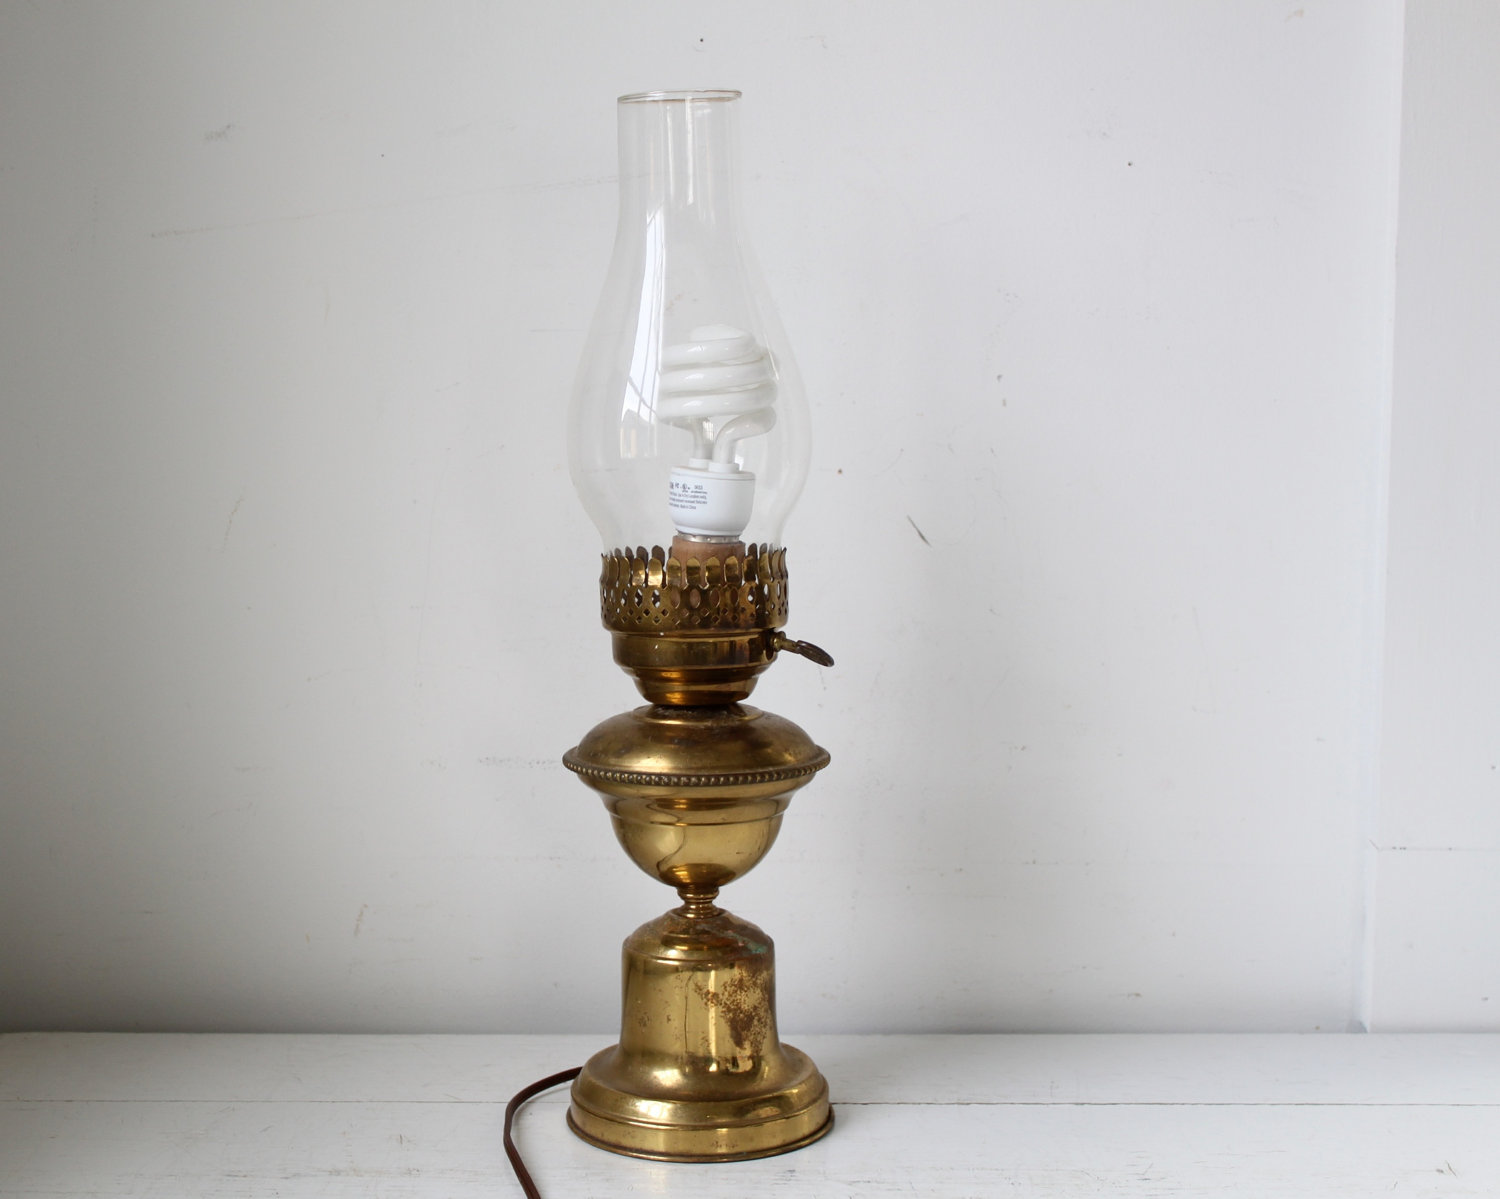 Why Is It Called A Hurricane Lamp